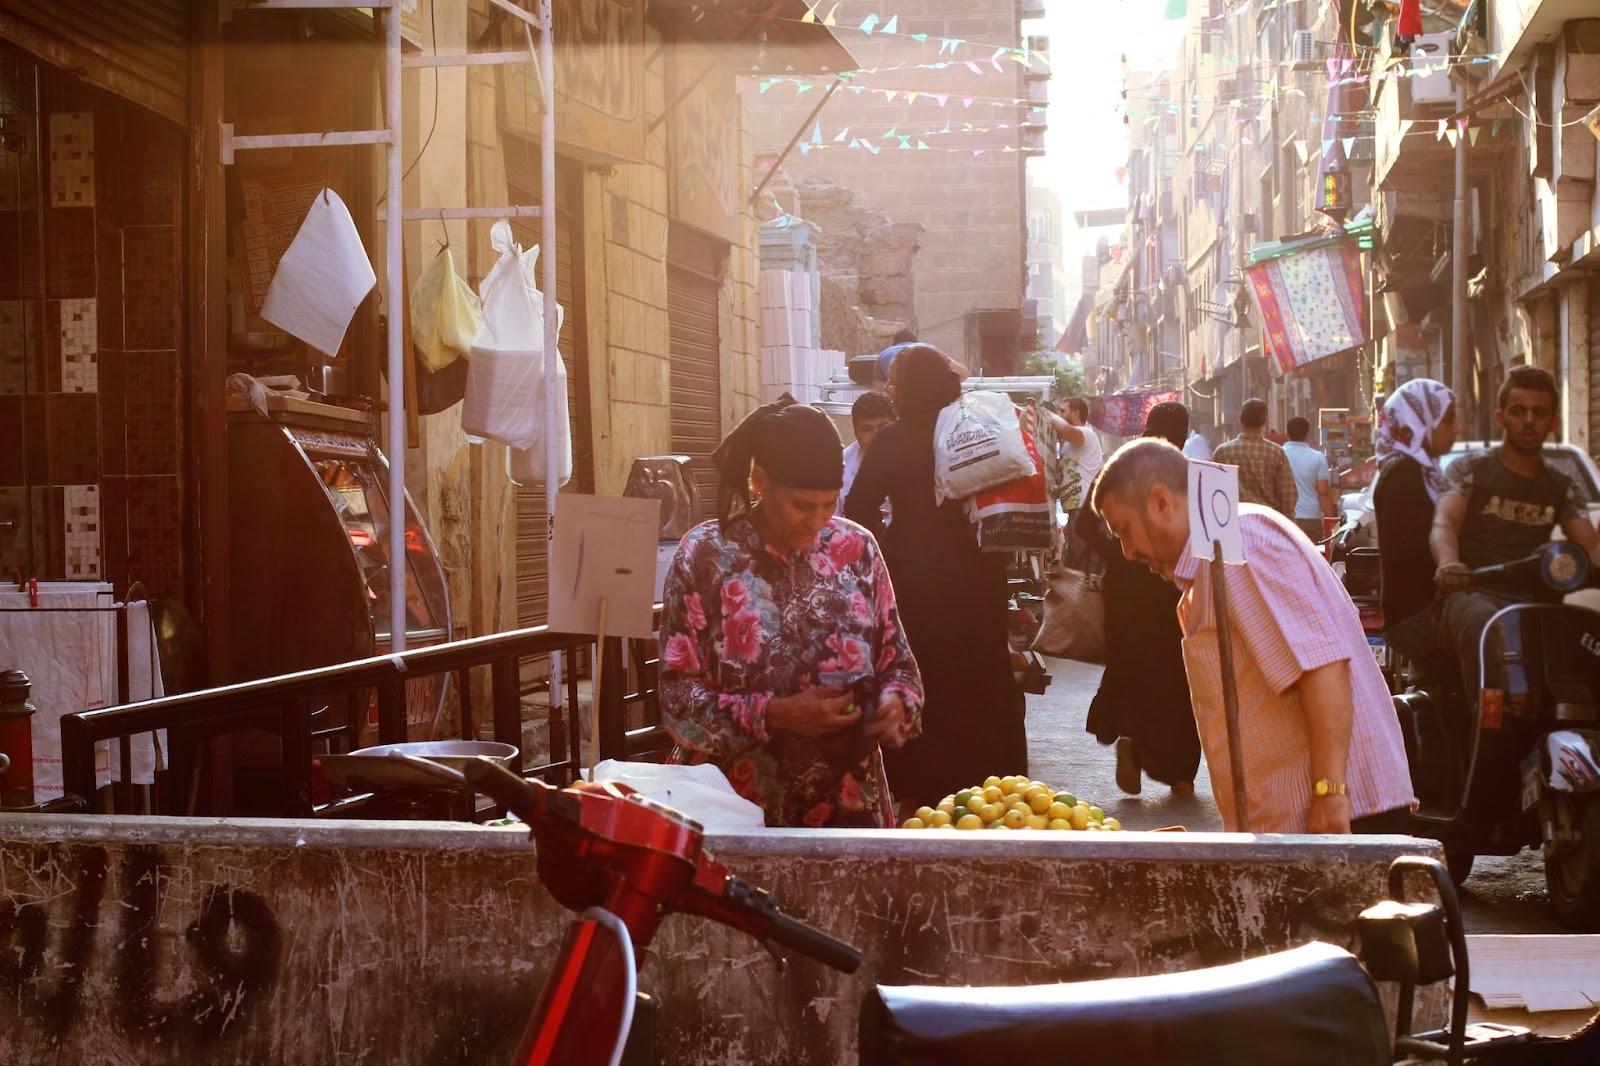 Egyptian locals wandering the markets on the streets of Egypt